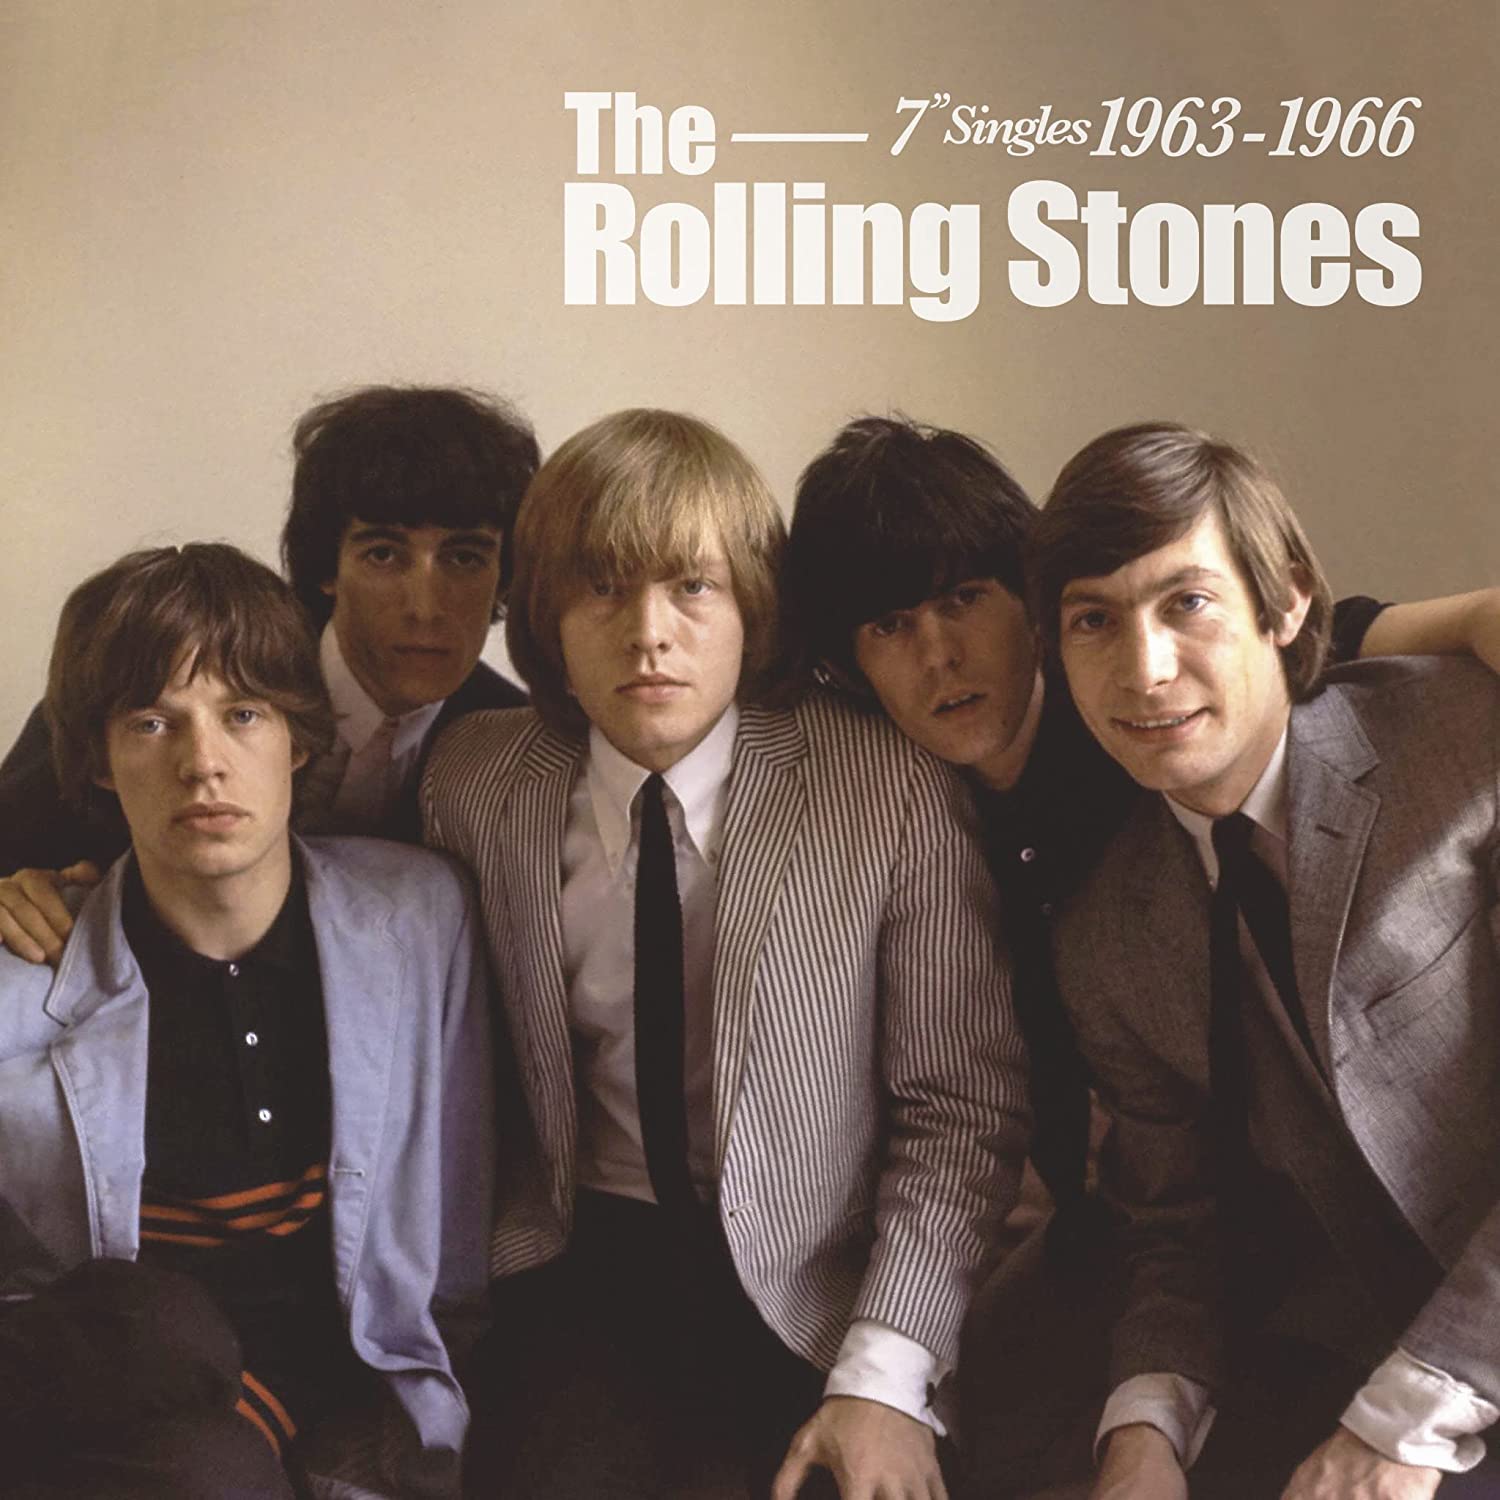 The Rolling Stones - 7 Singles 1963-1966 - Vinyl | The Rolling Stones image